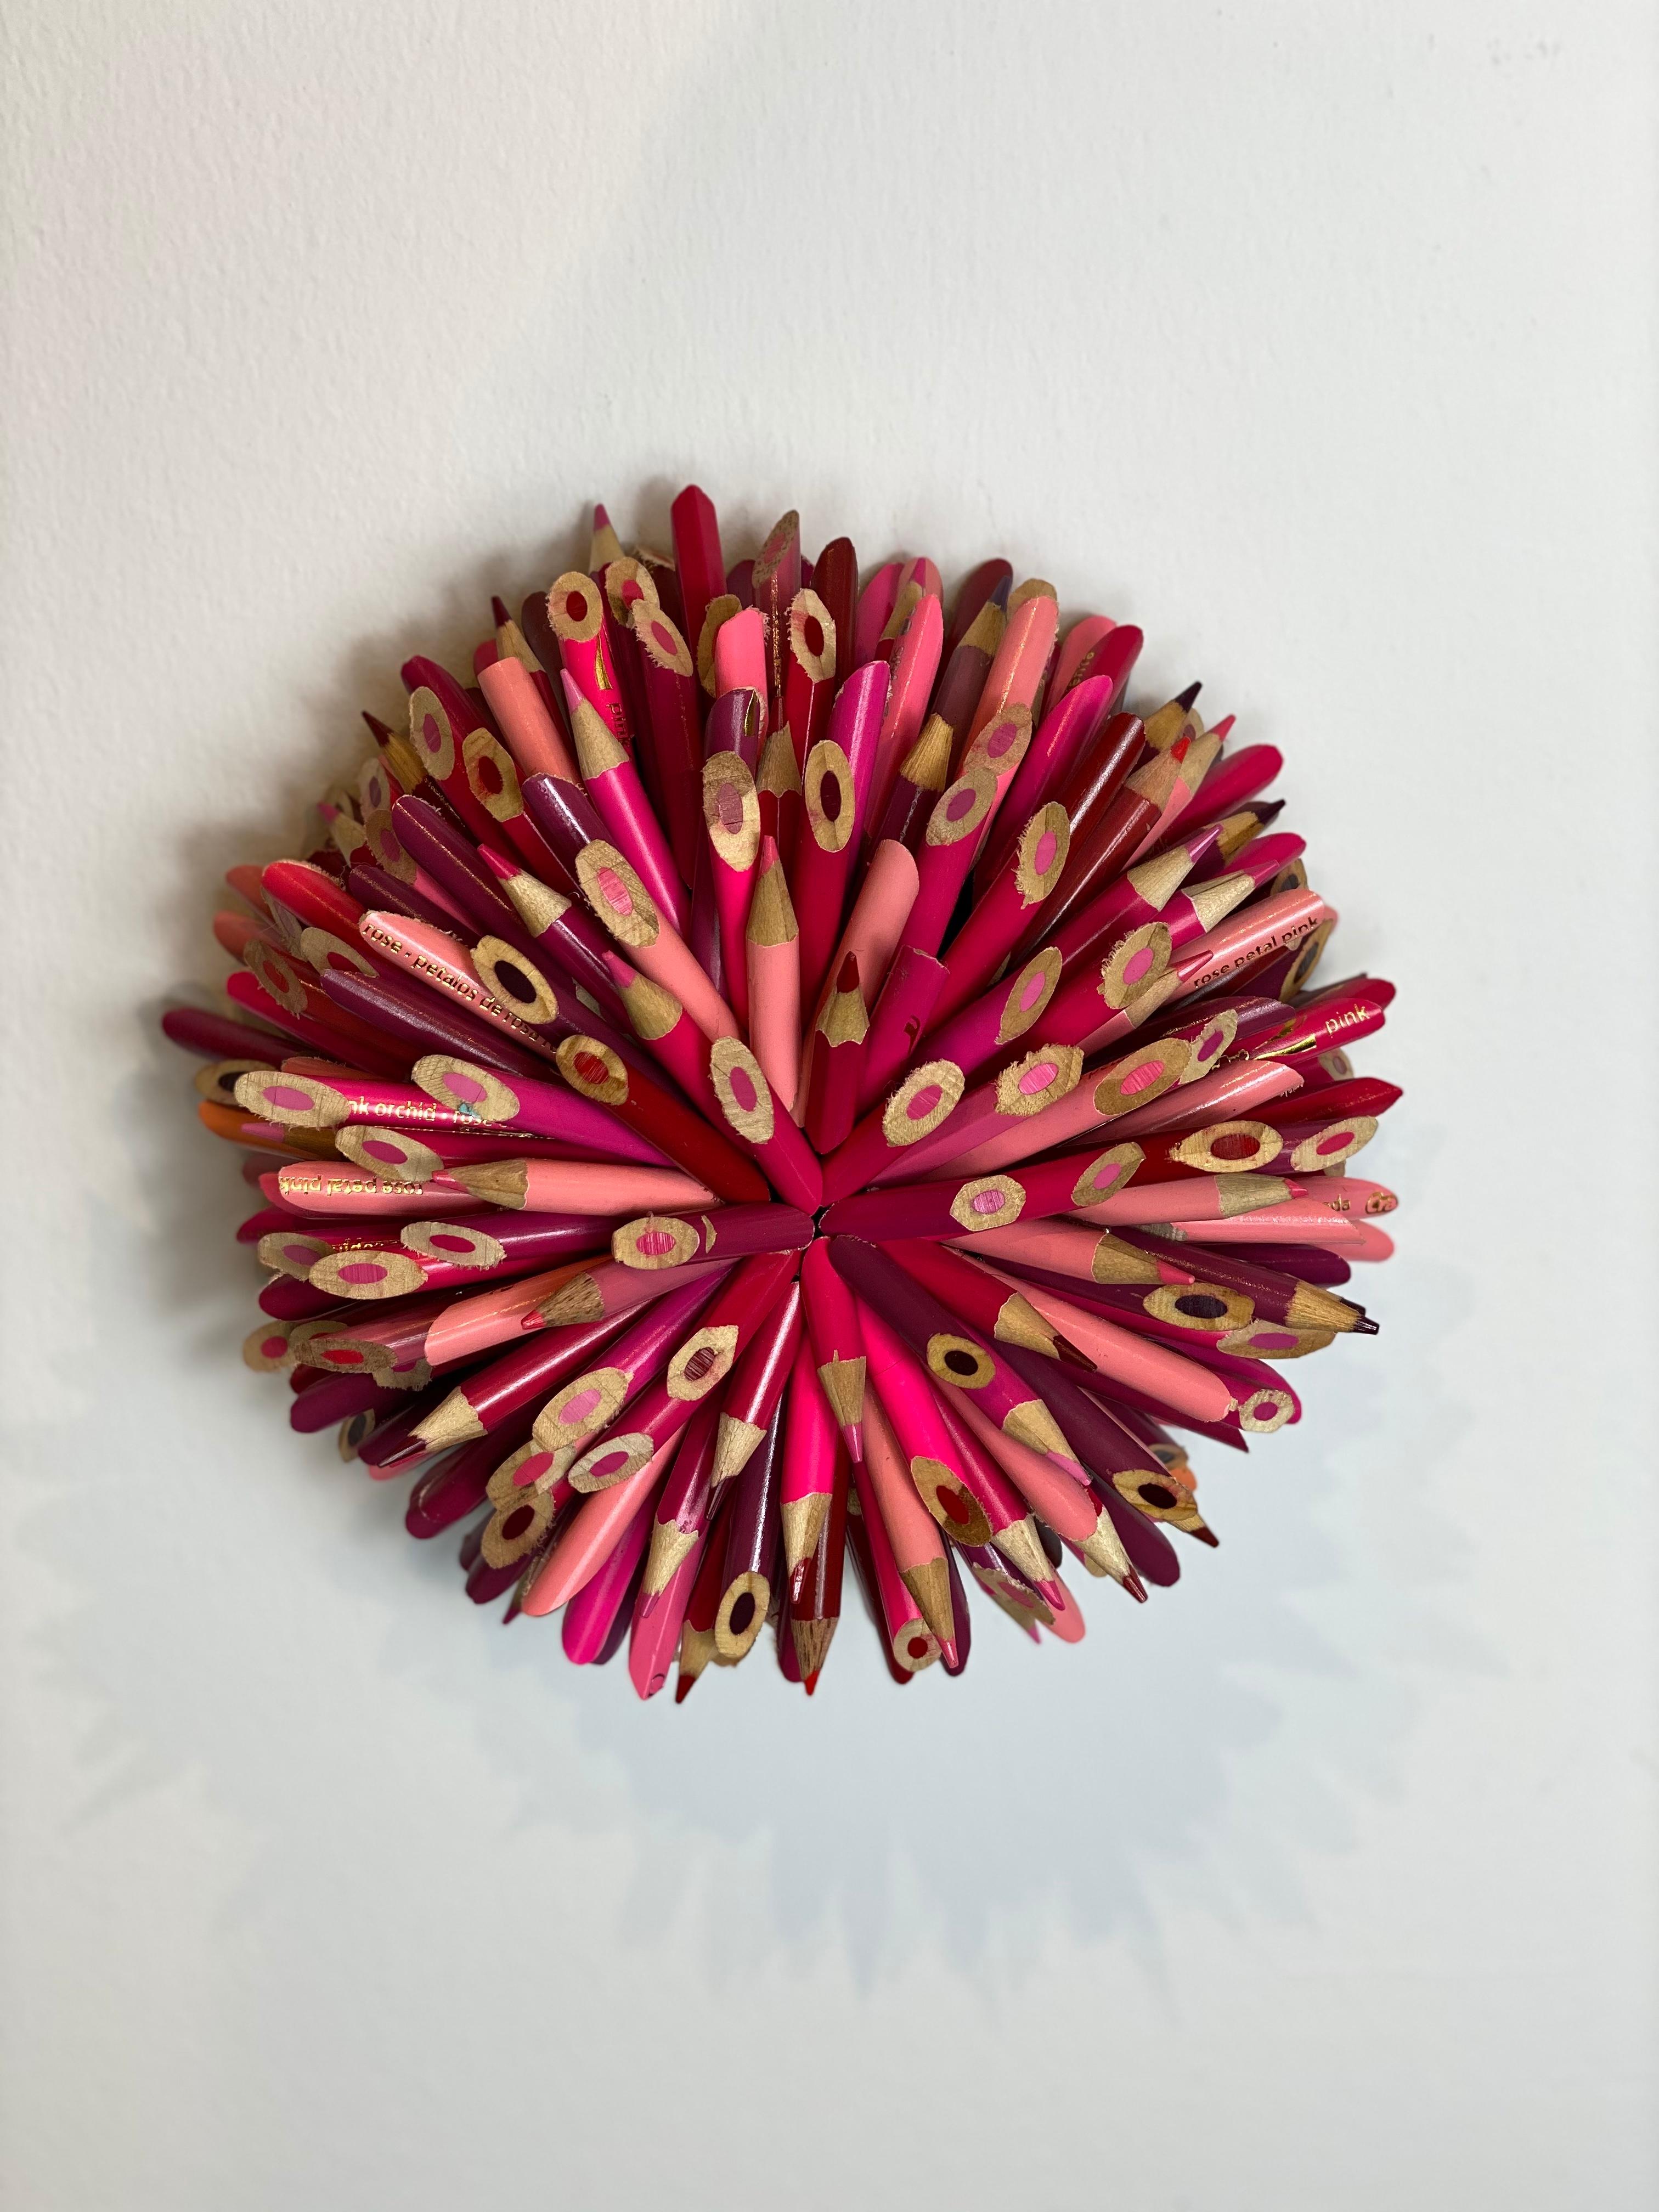 Pink Pencil Flower - Mixed Media Art by Federico Uribe